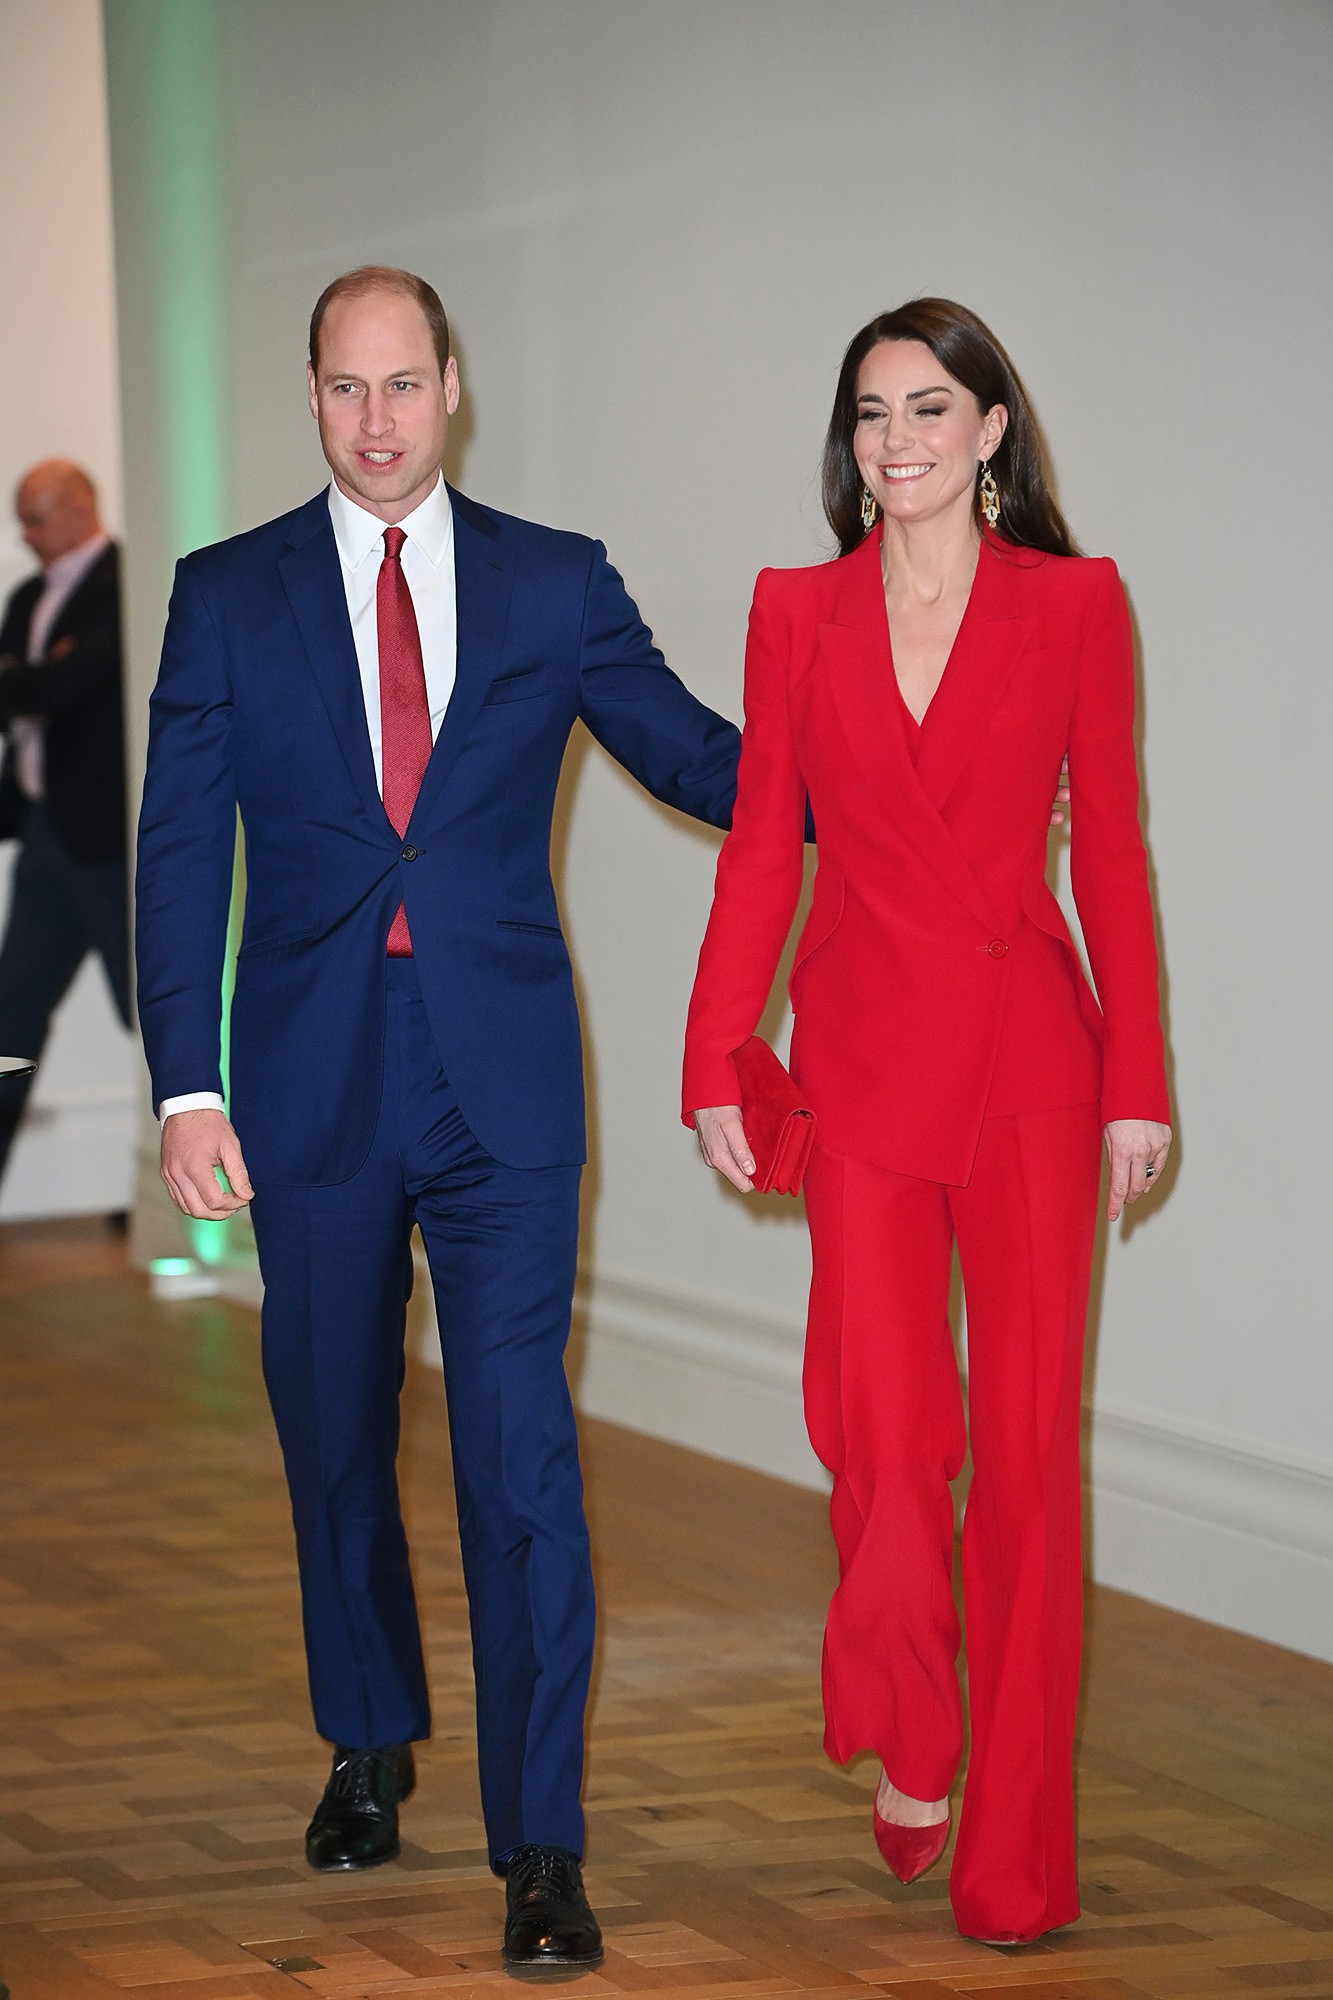 https://www.usmagazine.com/wp-content/uploads/2023/01/Princess-Kate-Leaves-an-Impression-With-Stunning-Red-Pantsuit-at-BAFTA-Event-Ahead-of-Early-Years-Campaign-Launch-554.jpg?quality=86&strip=all